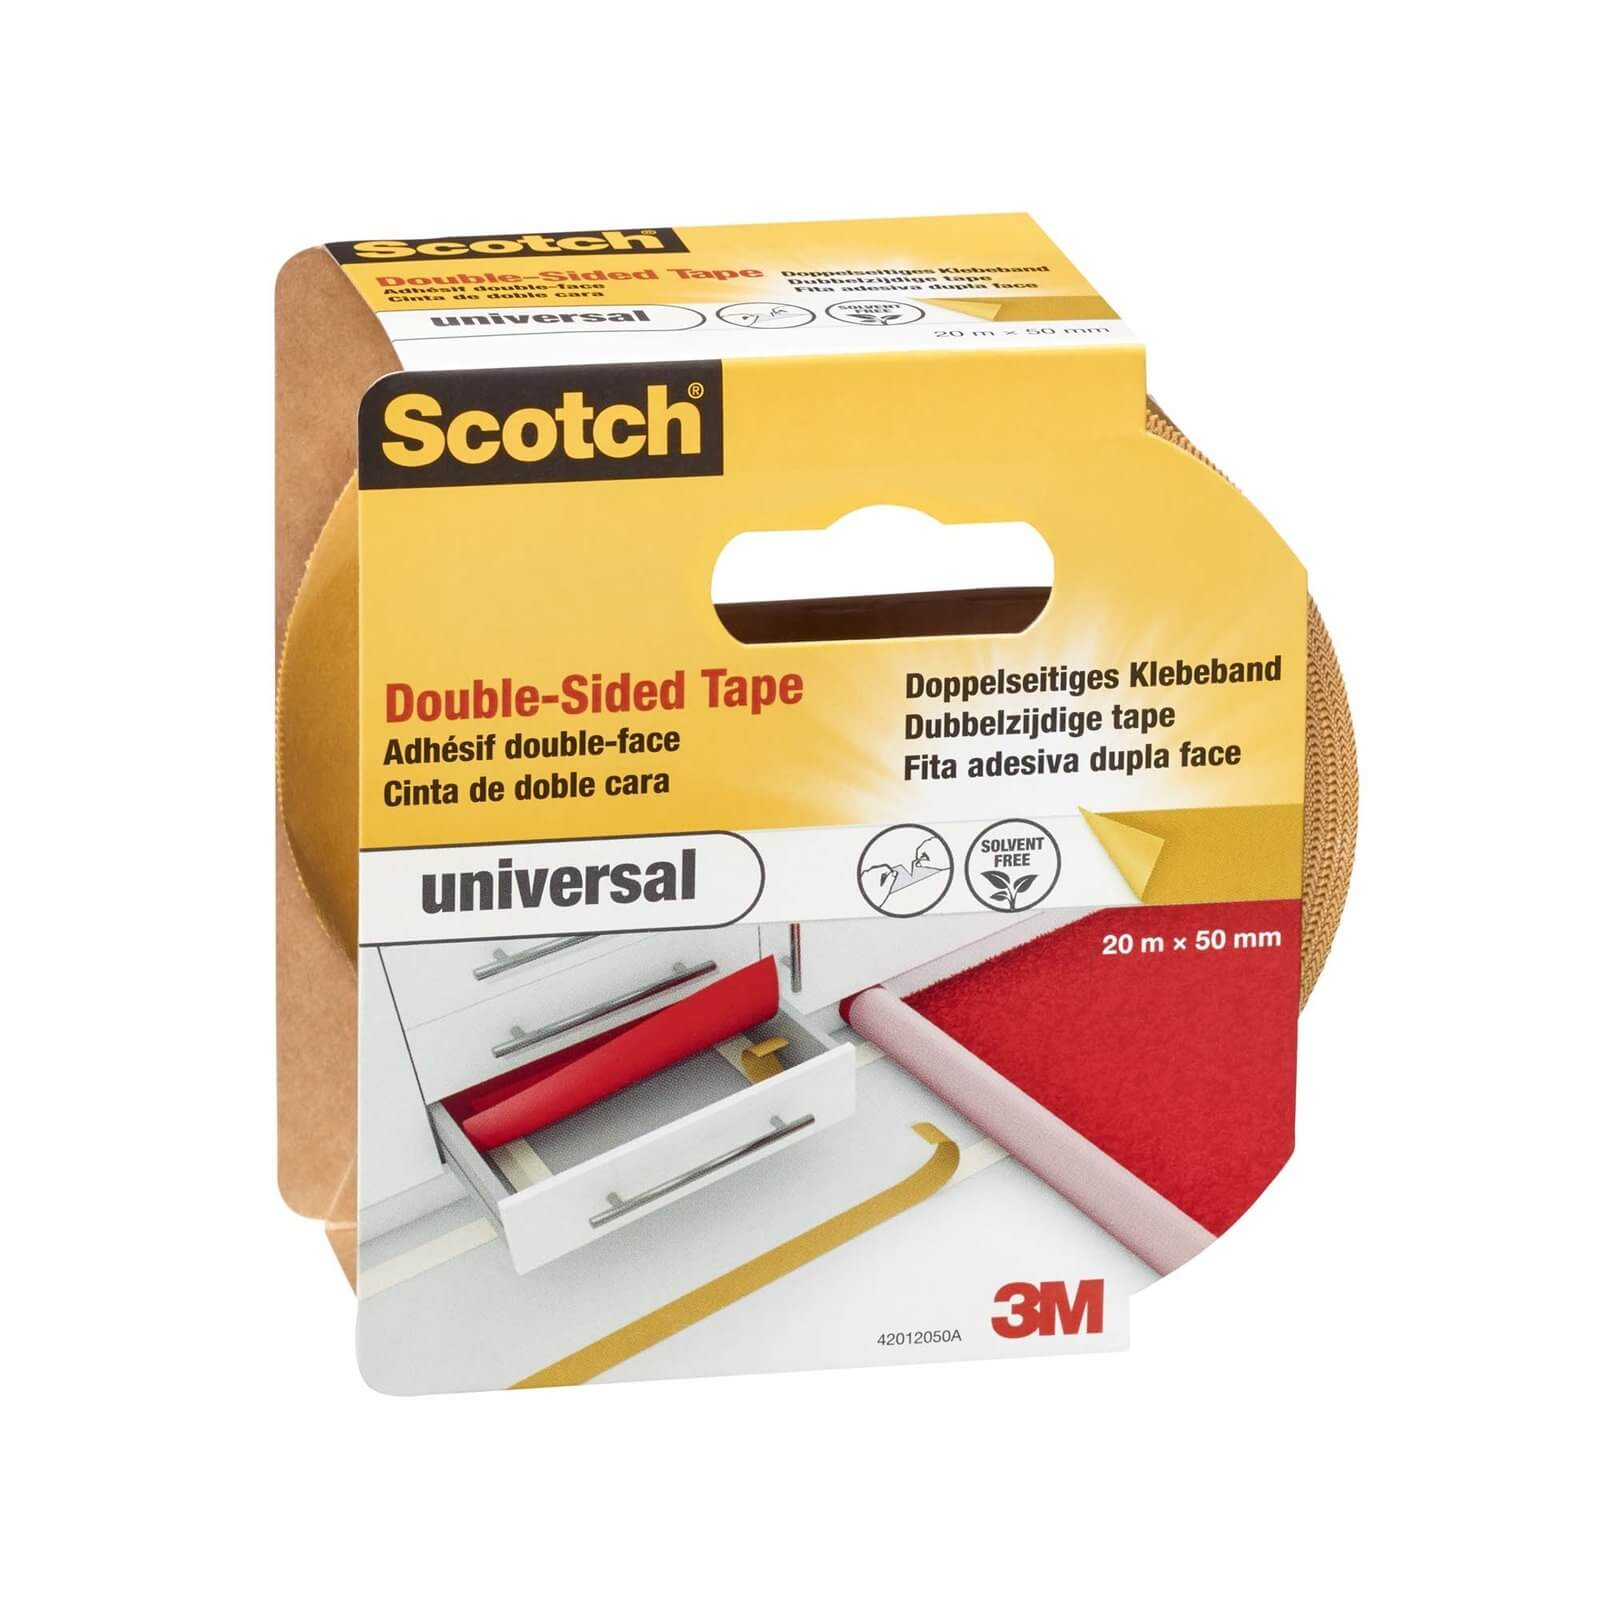 Scotch Double Sided Tape 20m x 50mm